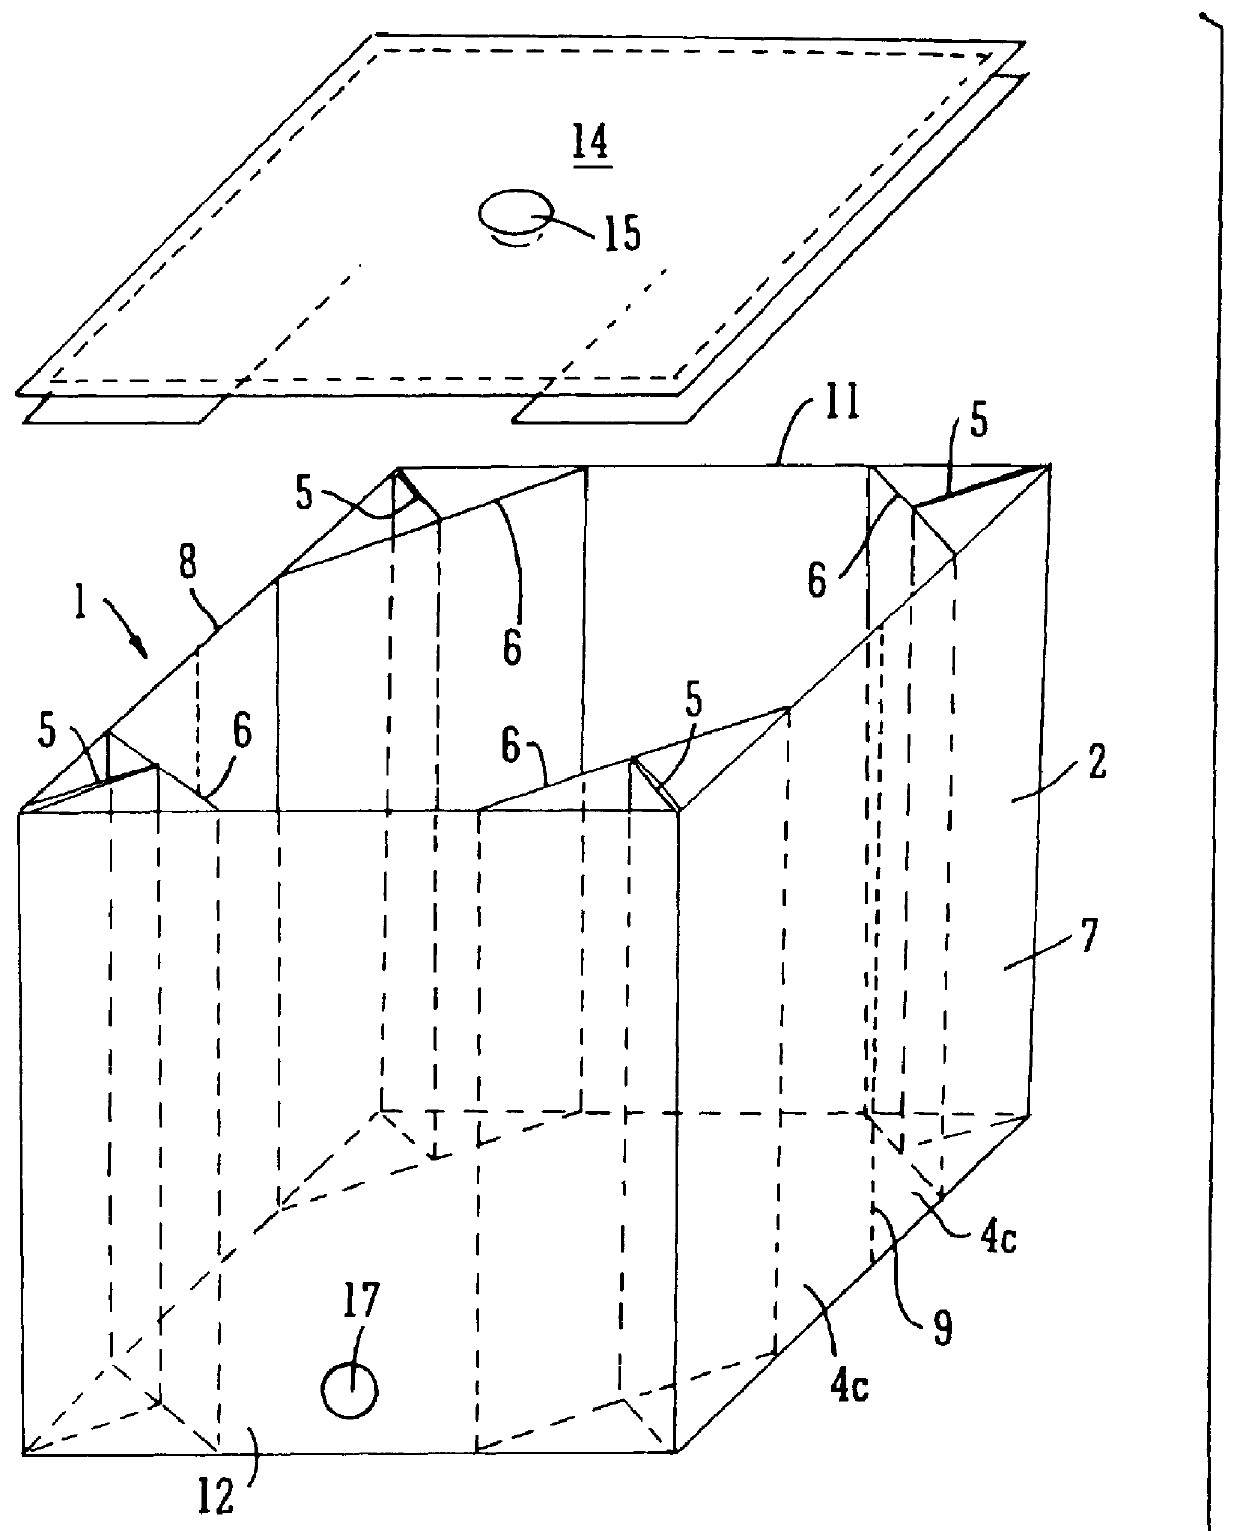 Flexible container for flowable materials